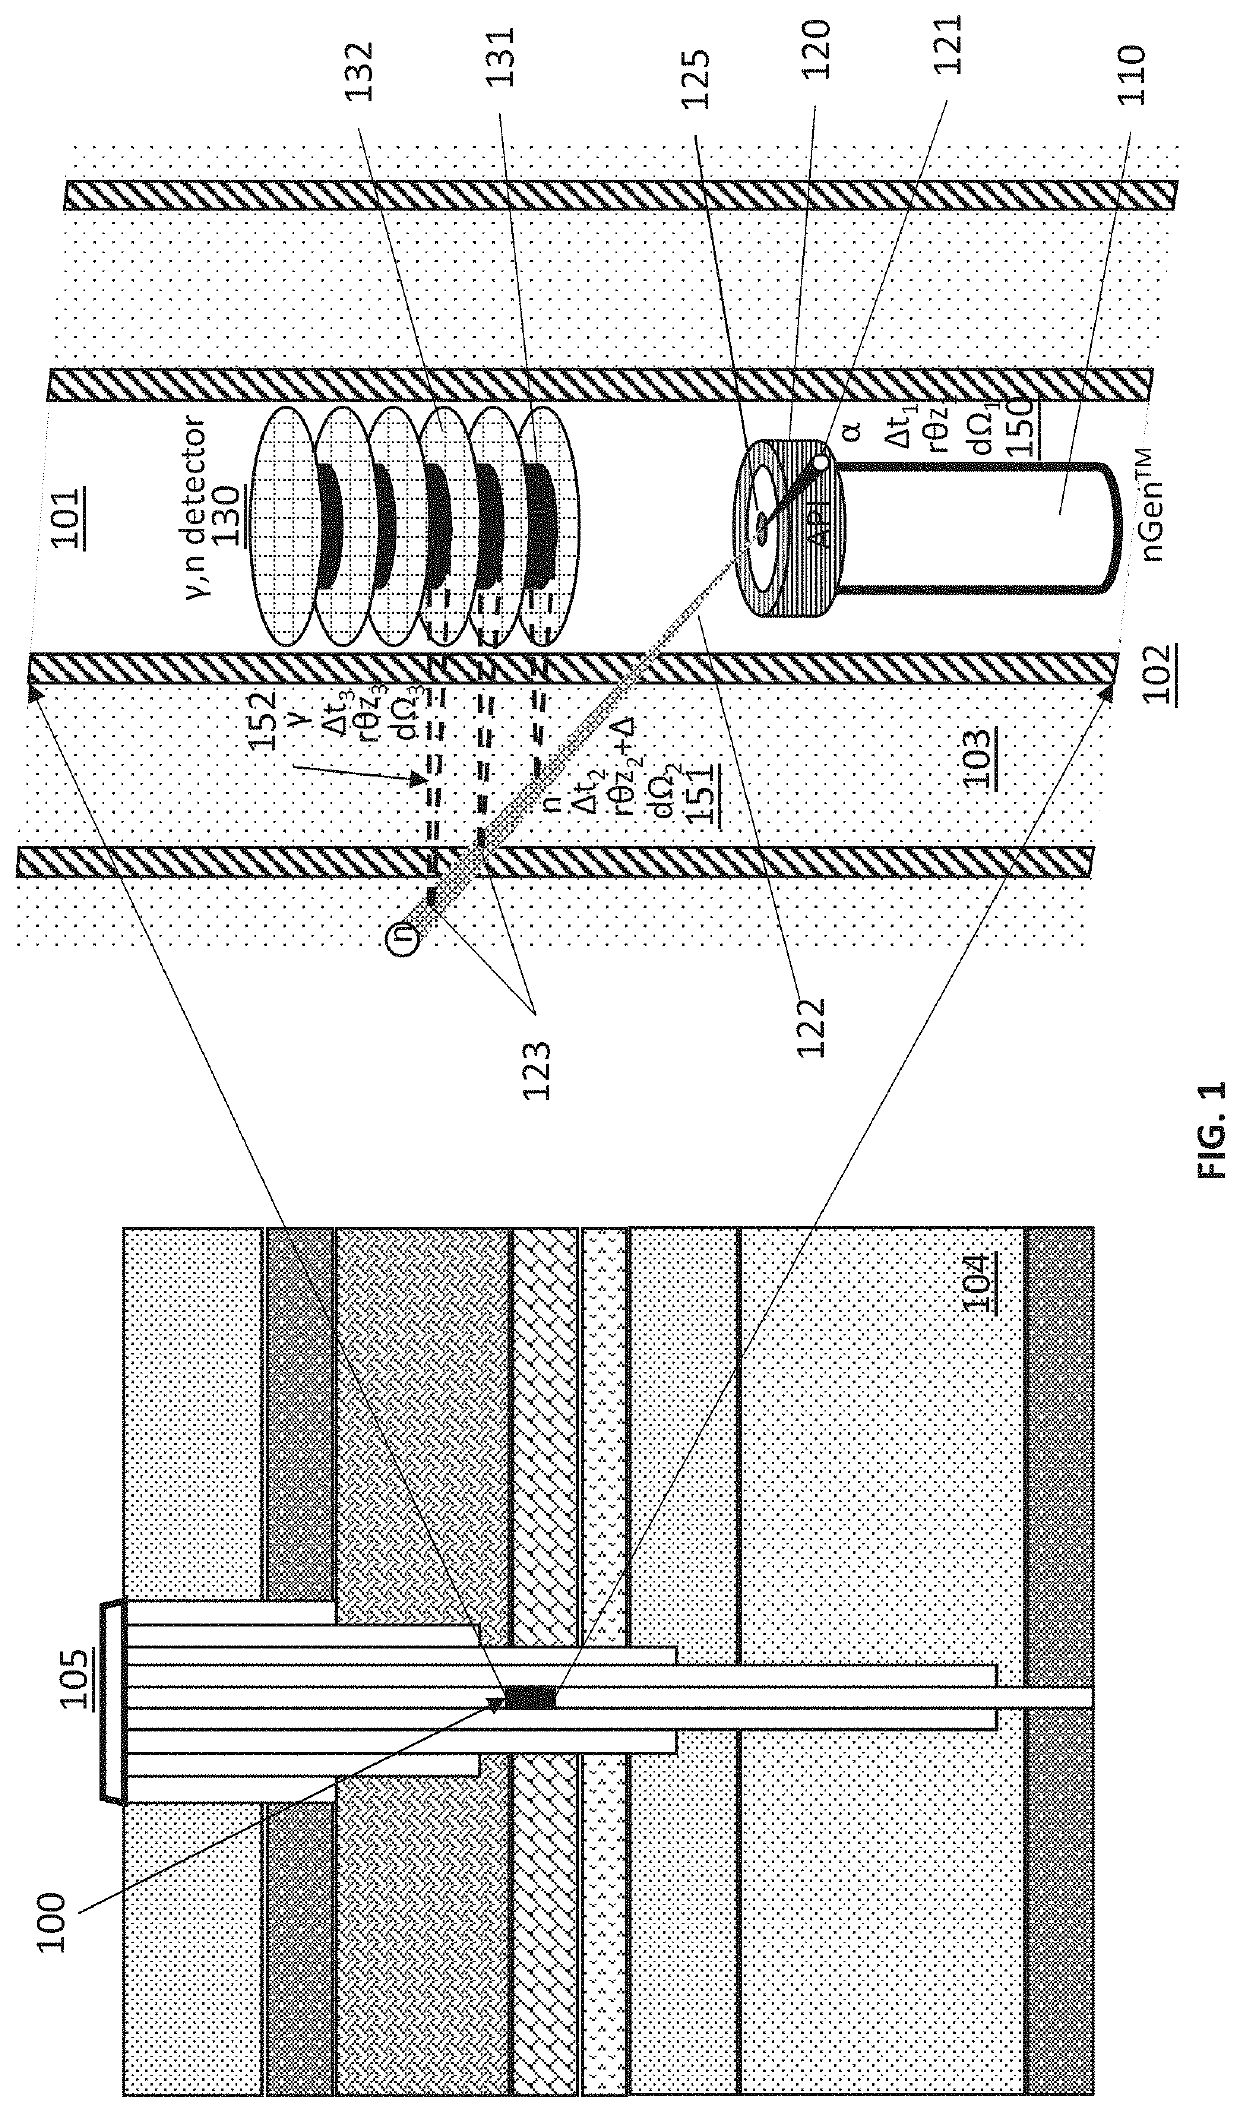 Associated particle detection for performing neutron flux calibration and imaging